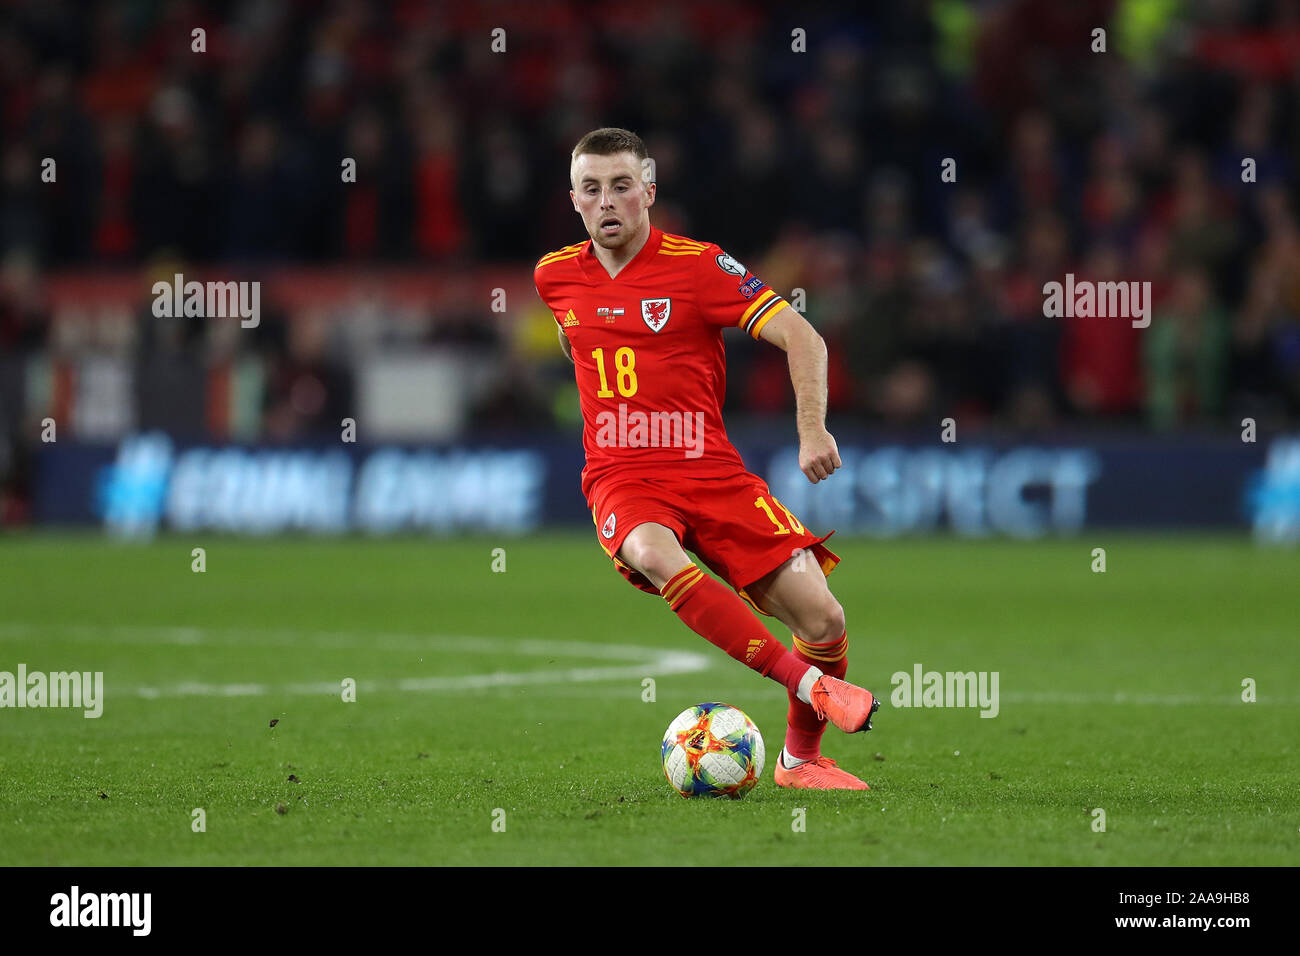 Joe Morrell of Wales in action.UEFA Euro 2020 qualifier group E match, Wales v Hungary at the Cardiff city Stadium in Cardiff , South Wales on Tuesday 19th November 2019. pic by Andrew Orchard/Andrew Orchard sports photography/Alamy live News EDITORIAL USE ONLY Stock Photo